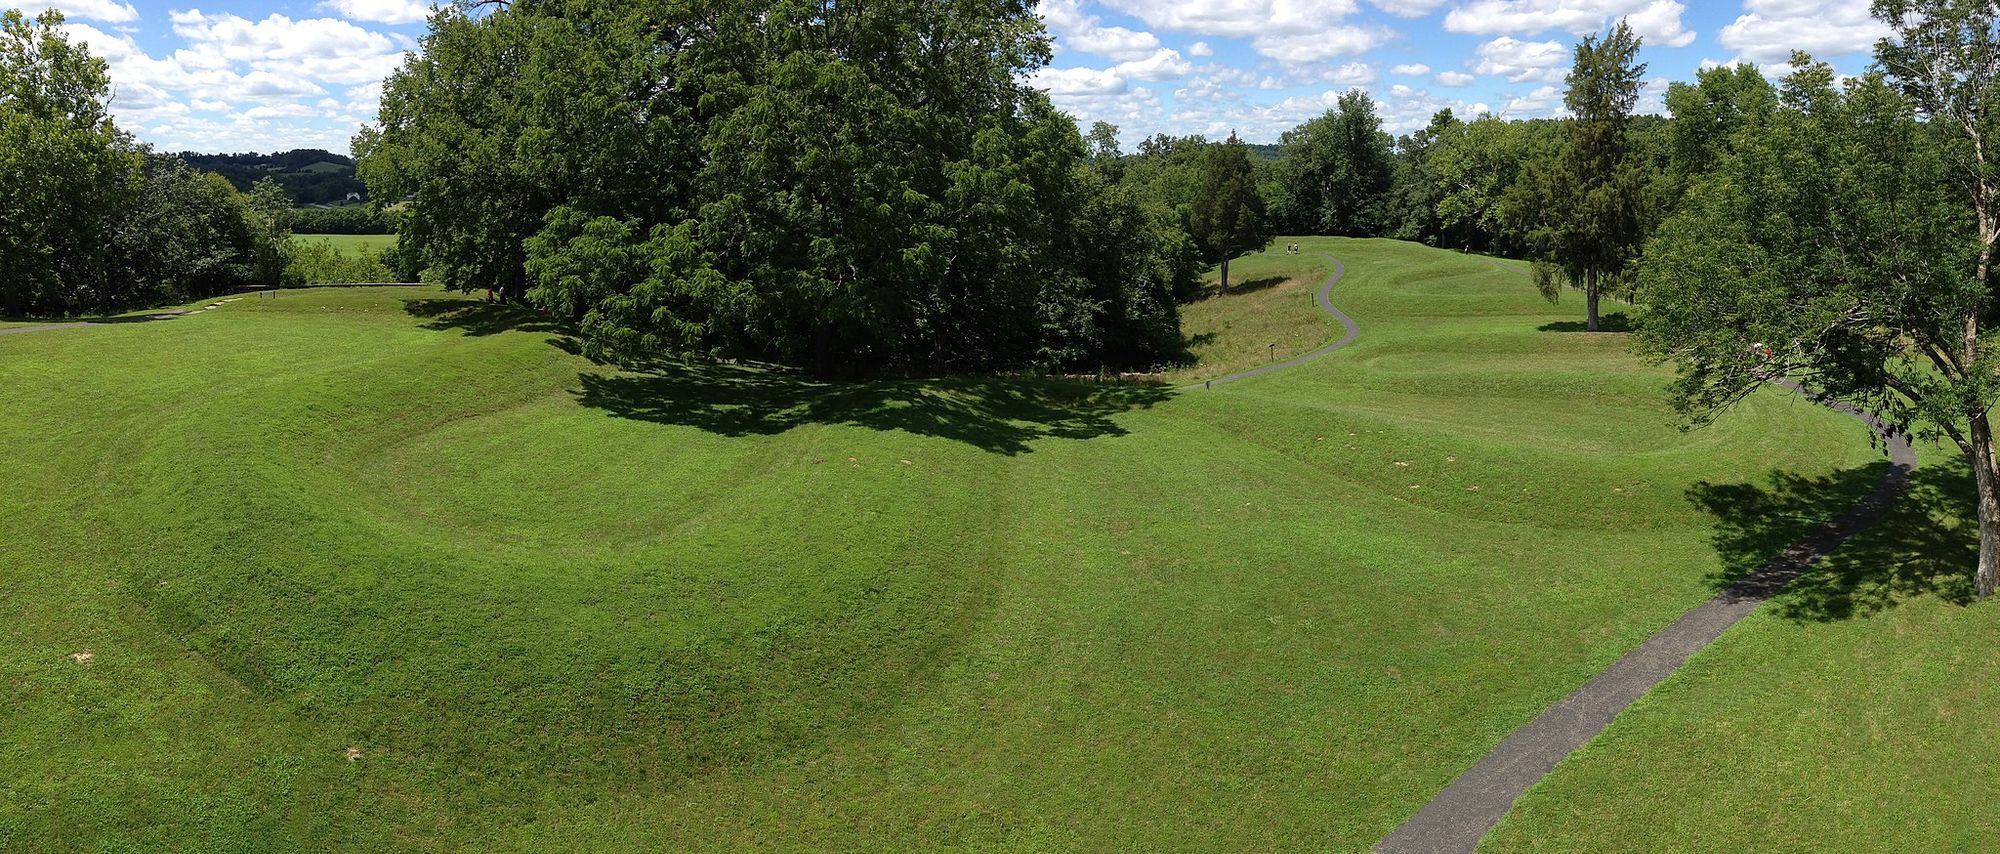  Serpent Mound in Sinking Spring Section of the Buckeye Trail - Eric Ewing, CC BY-SA 3.0 via Wikimedia Commons